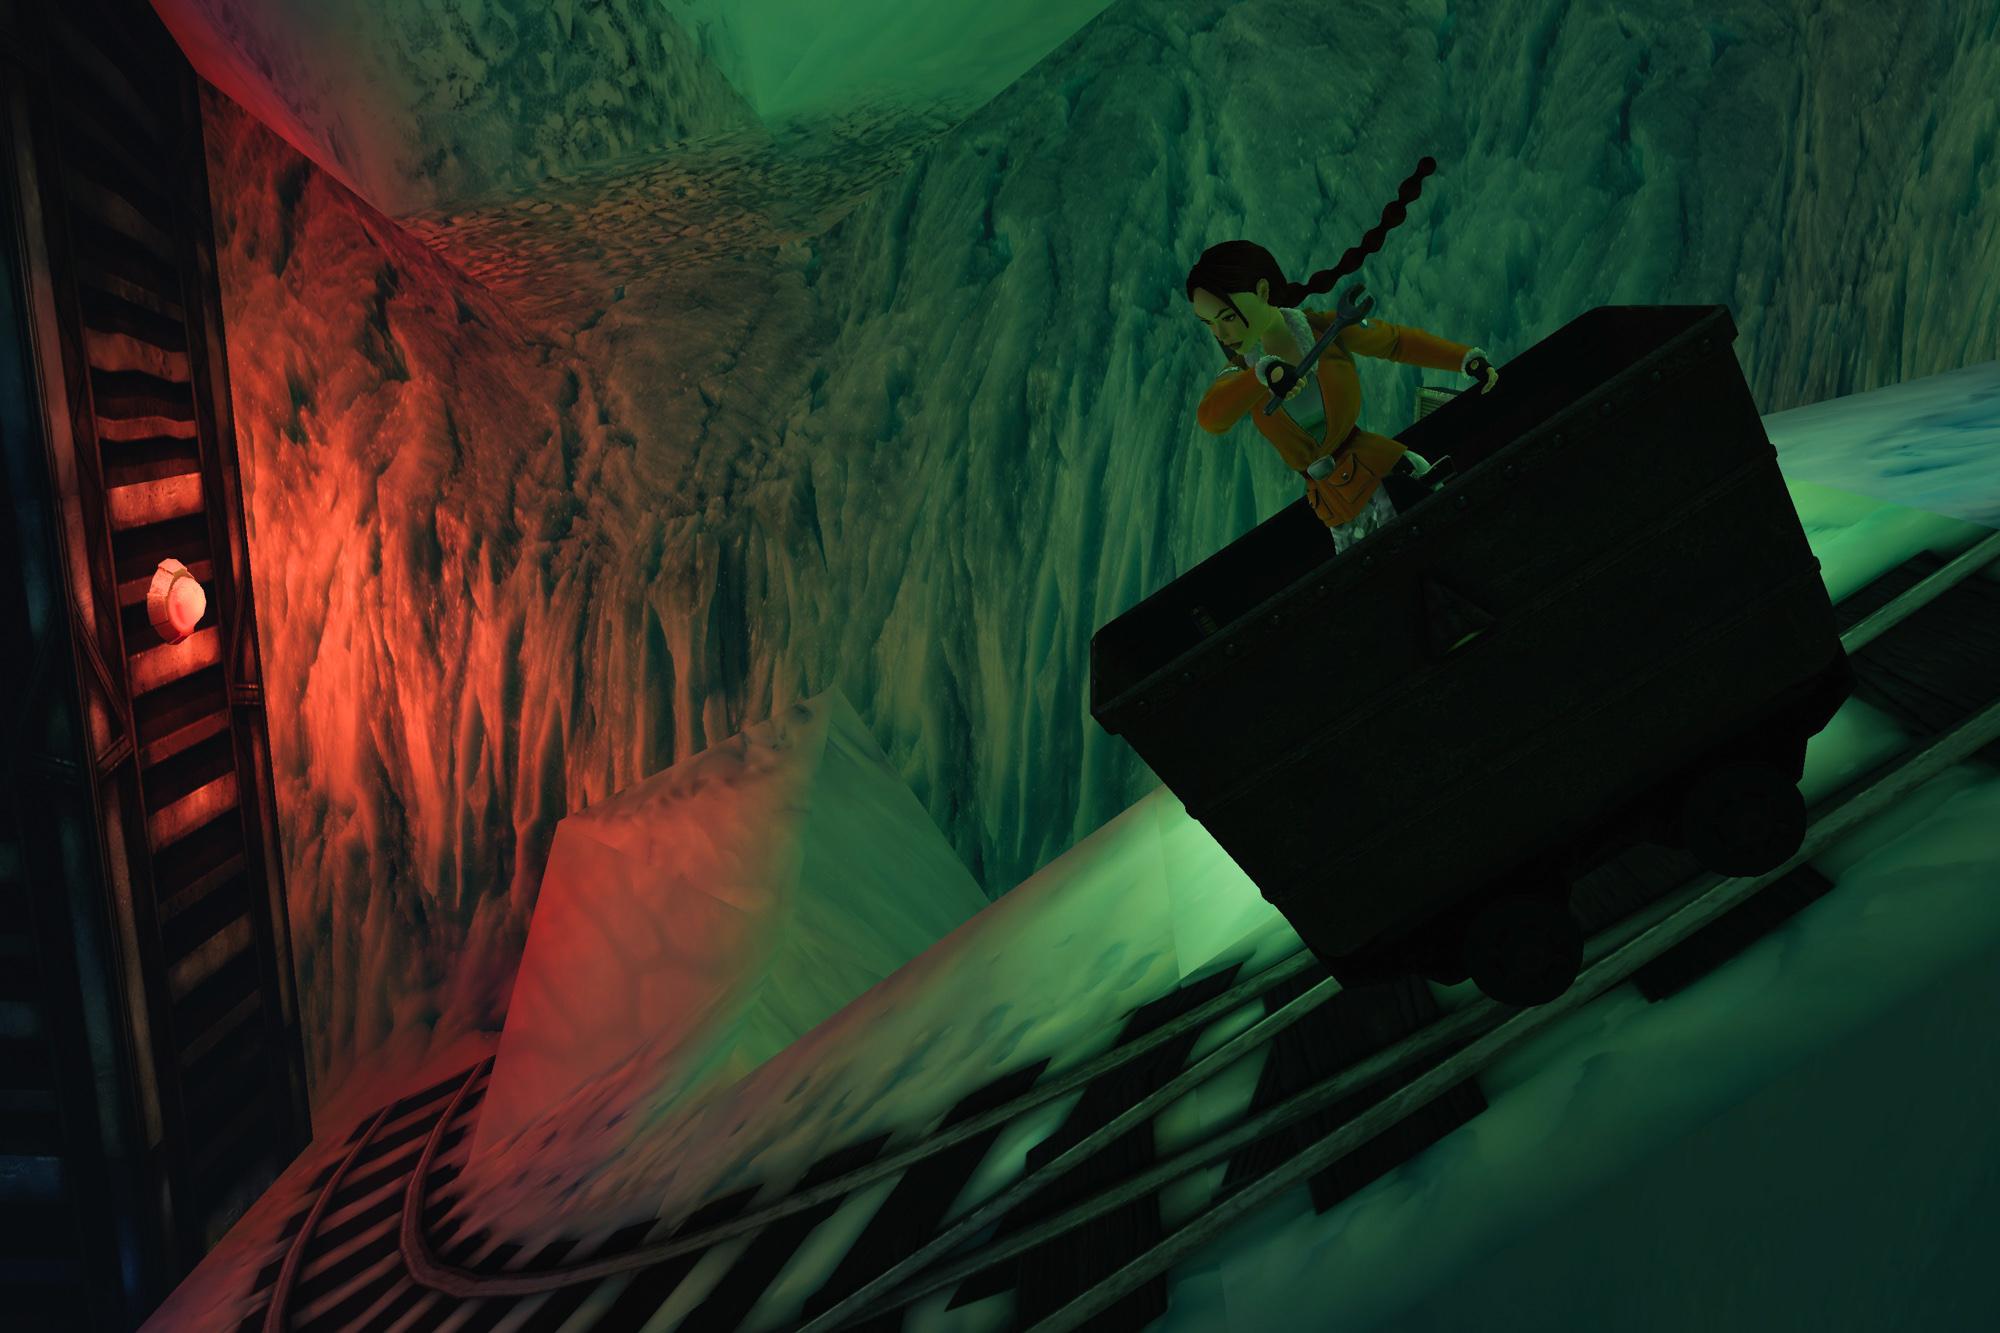 Lara in a mine cart in RX-Tech Mines going down a slope